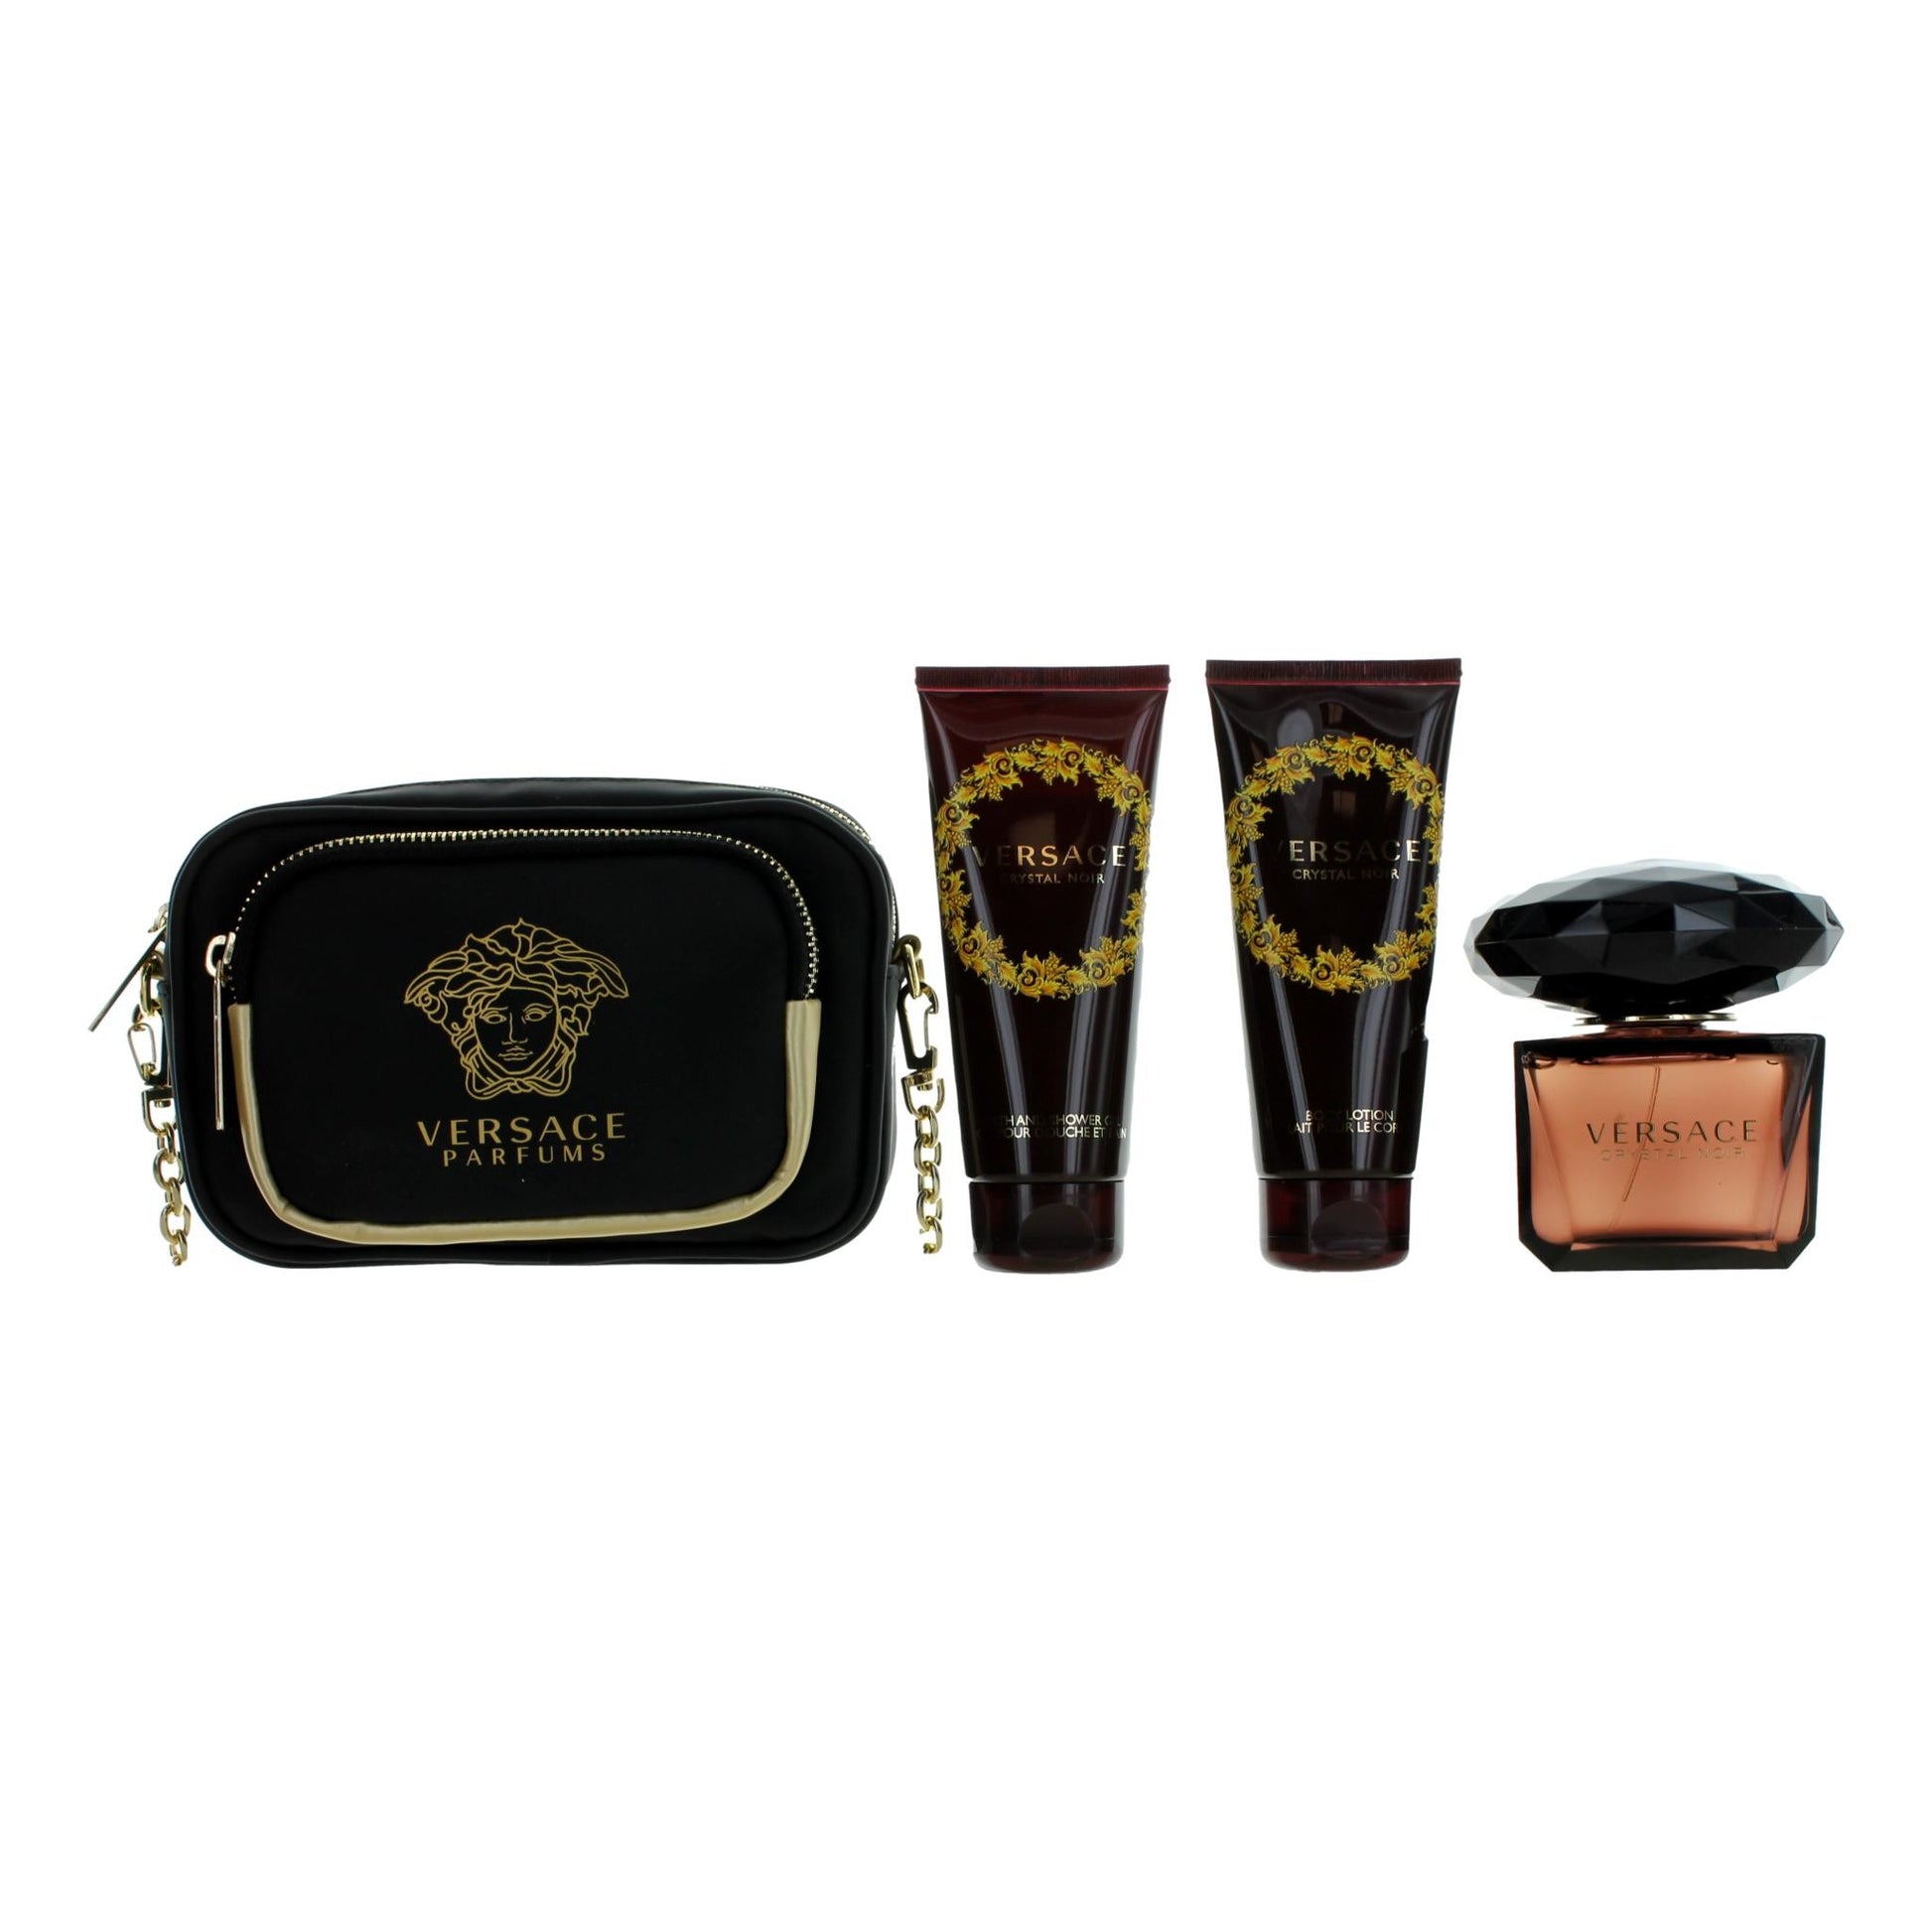 Bottle of Versace Crystal Noir by Versace, 4 Piece Gift Set for Women with Purse